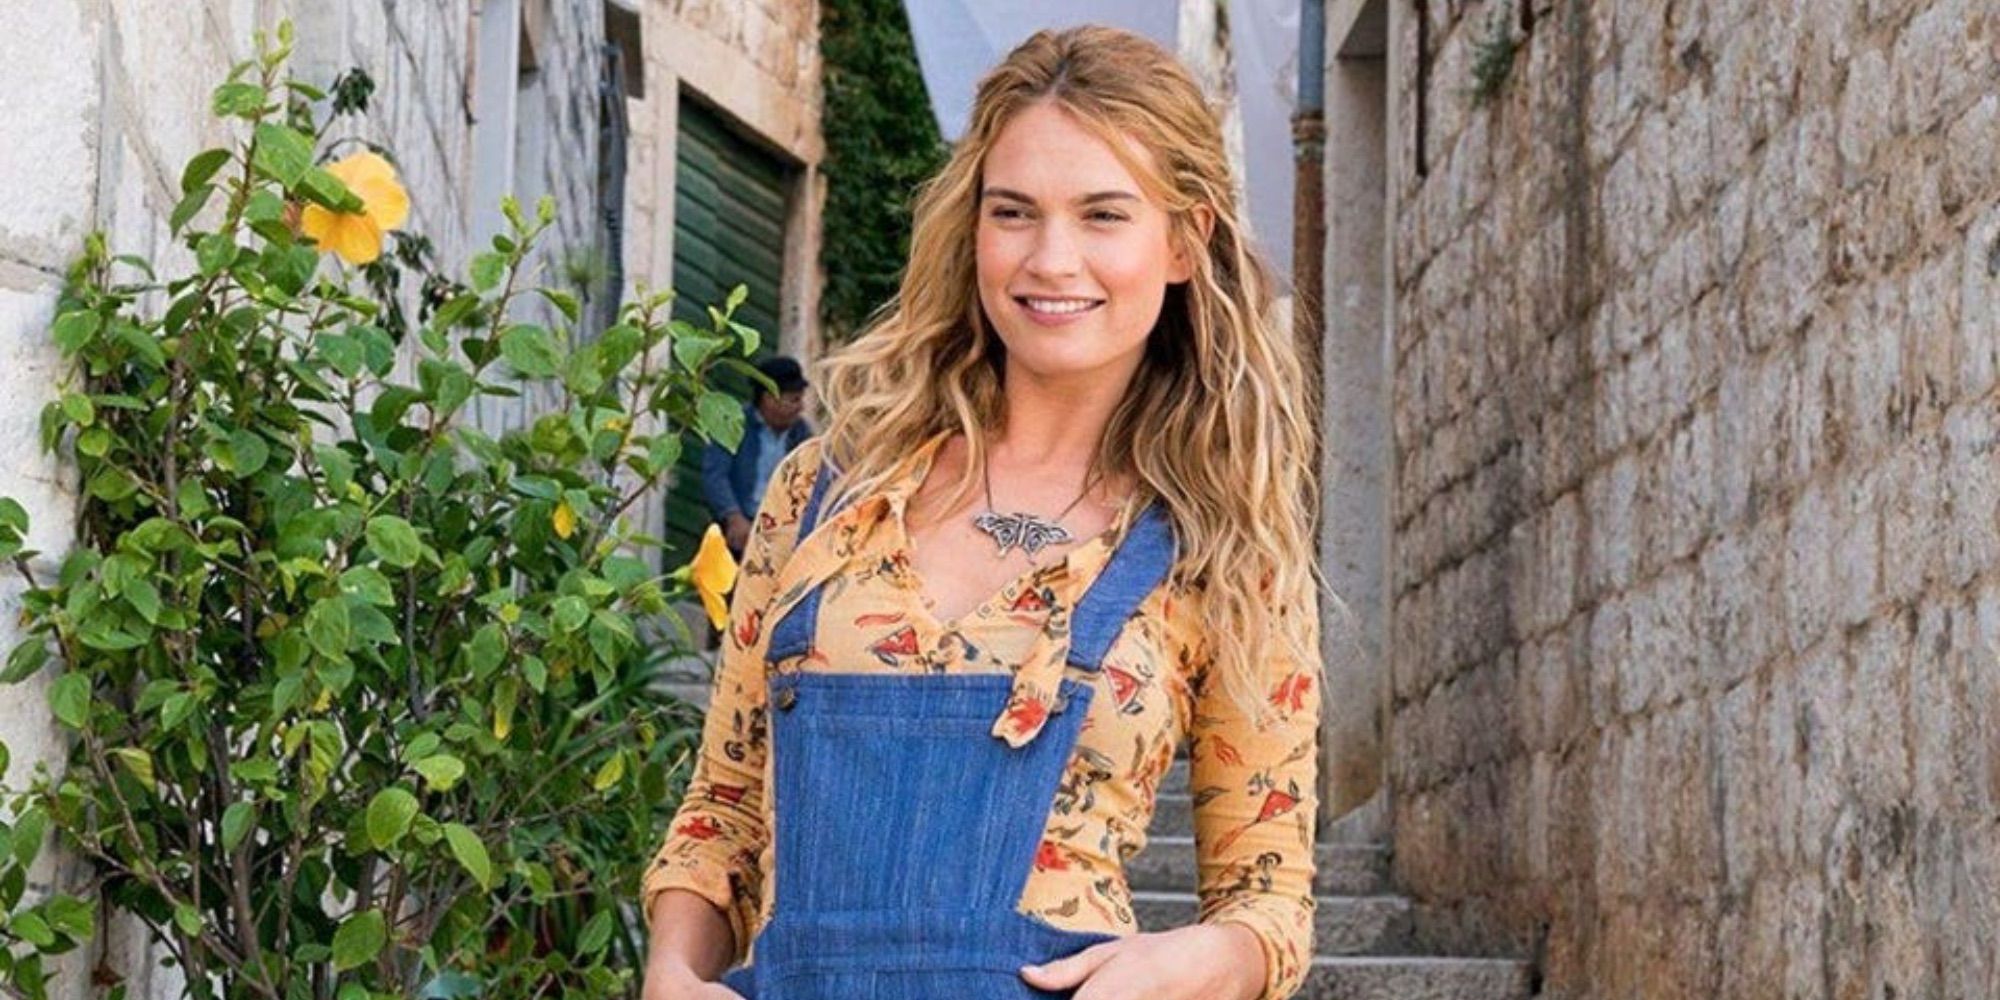 Lily James as Young Donna, wearing her overalls and smiling in Mamma Mia! Here We Go Again